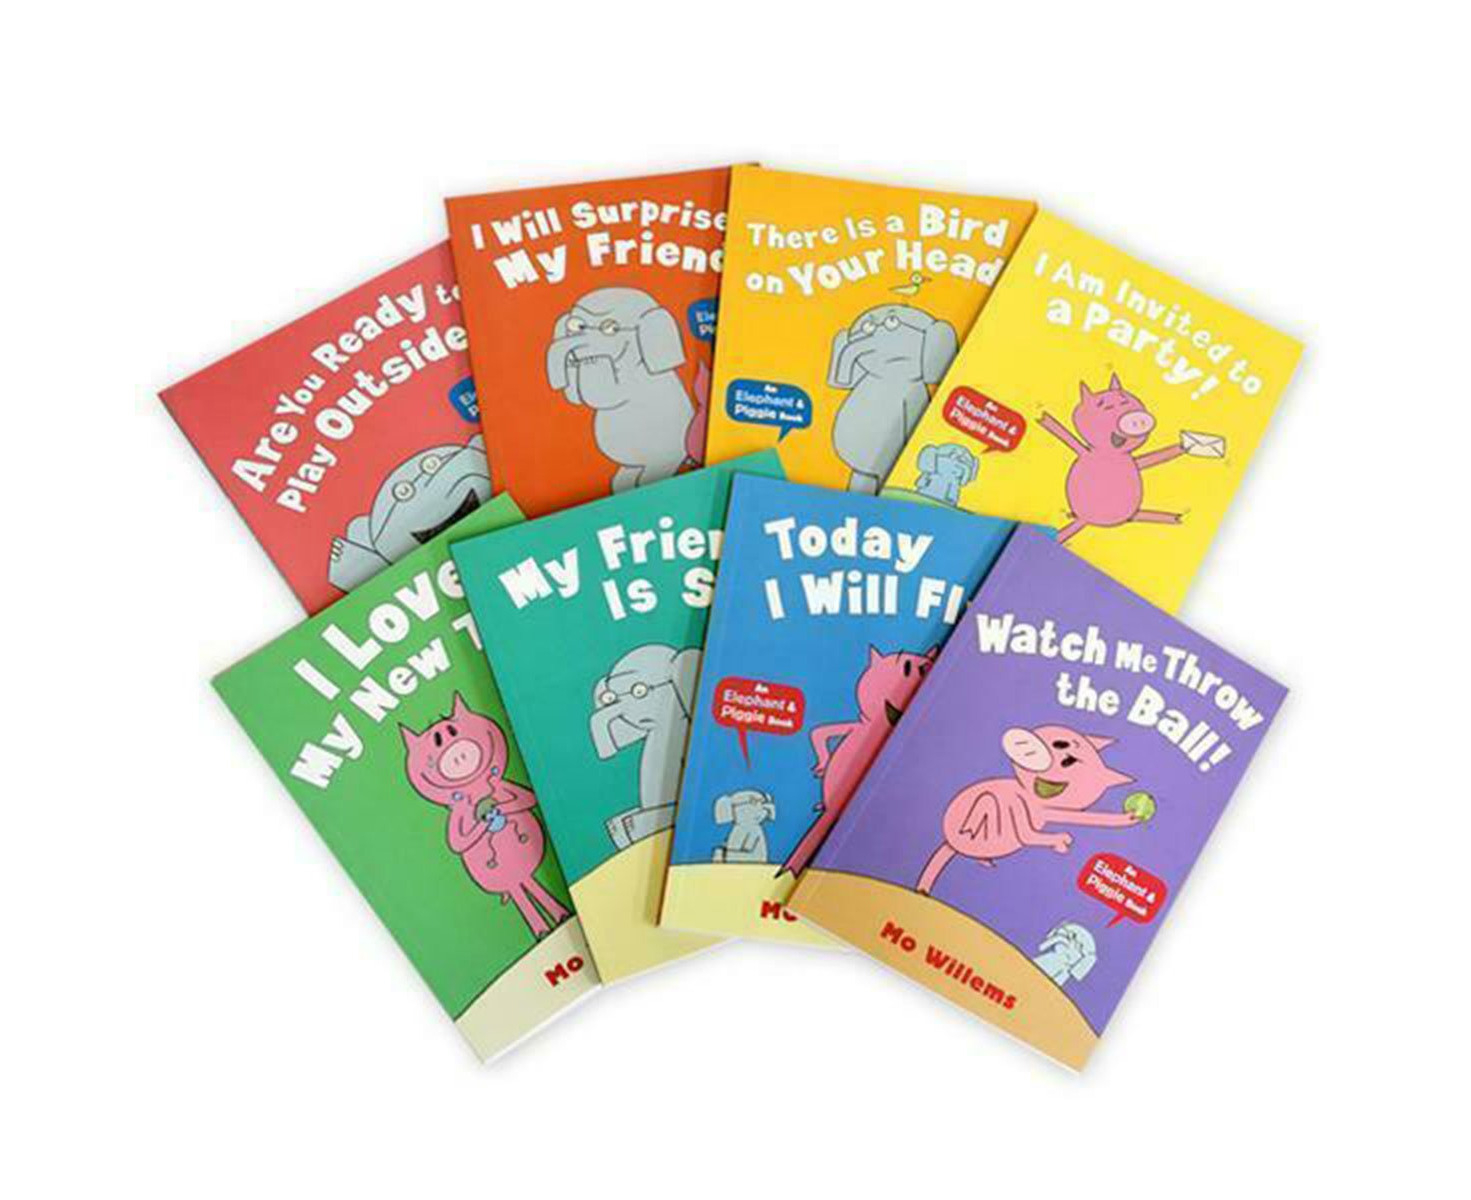 the-elephant-piggie-8-book-collection-by-mo-willems-catch-co-nz